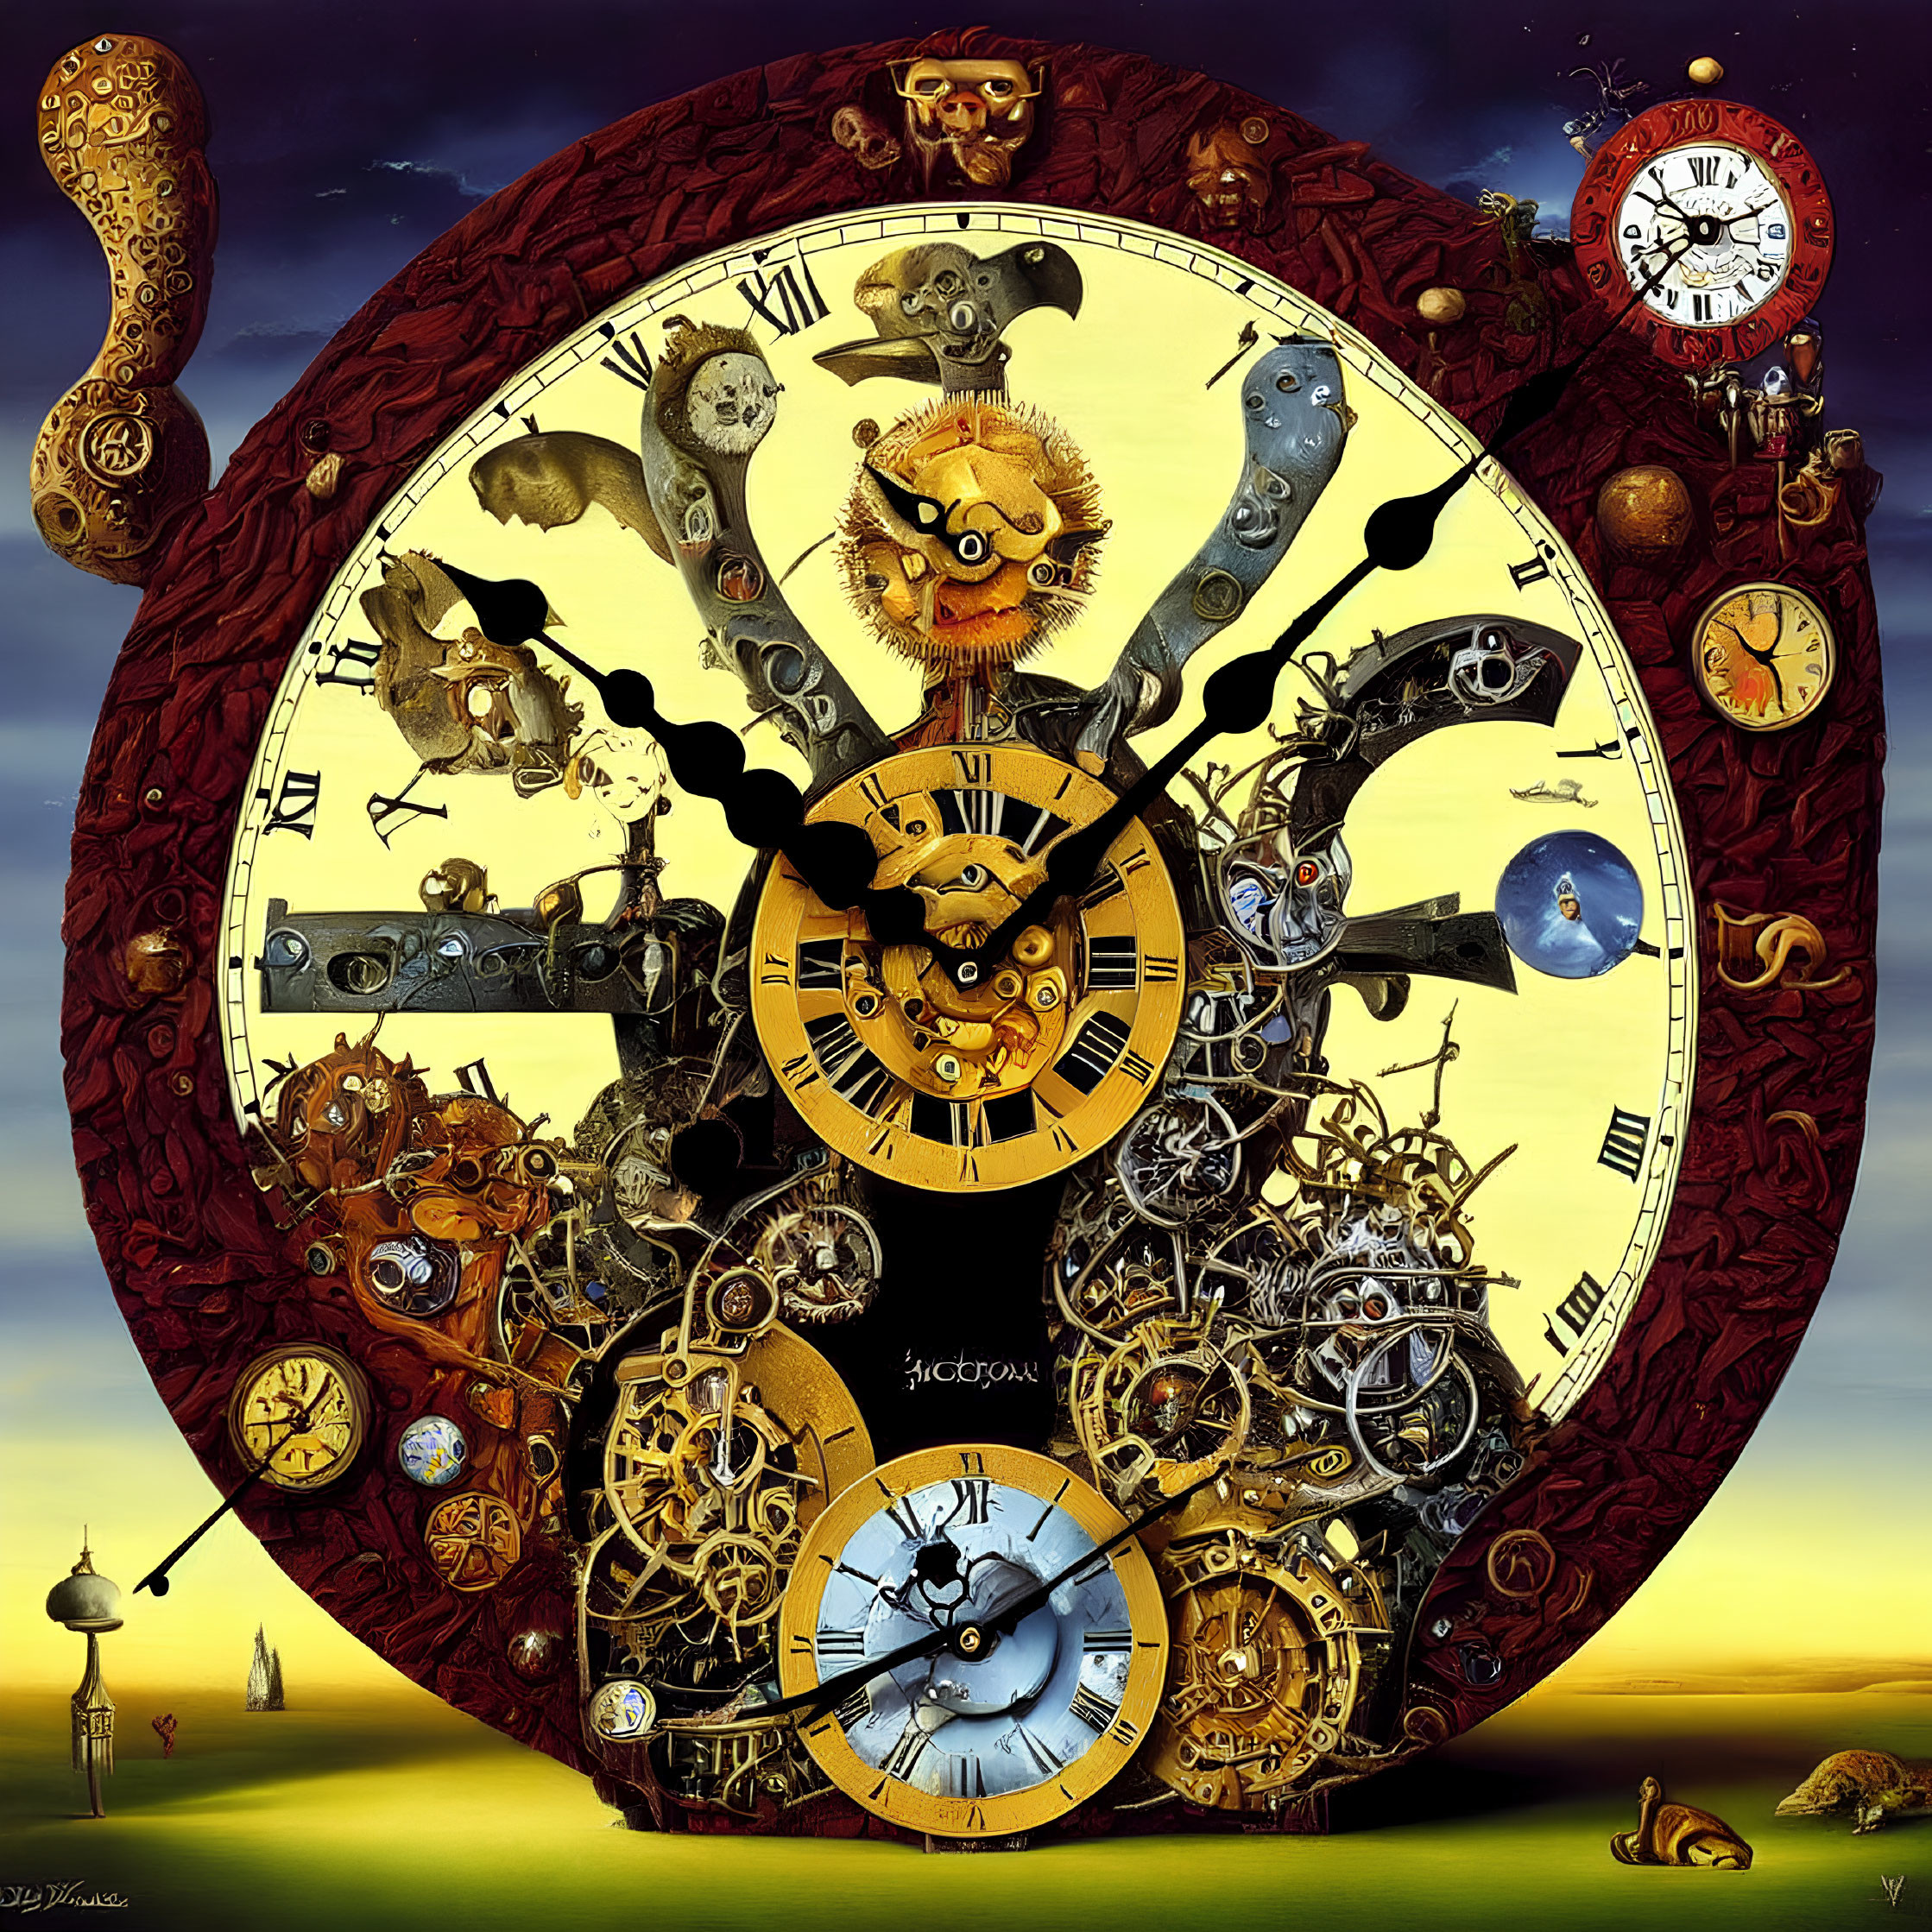 Intricate surreal clockwork with celestial bodies and central figure